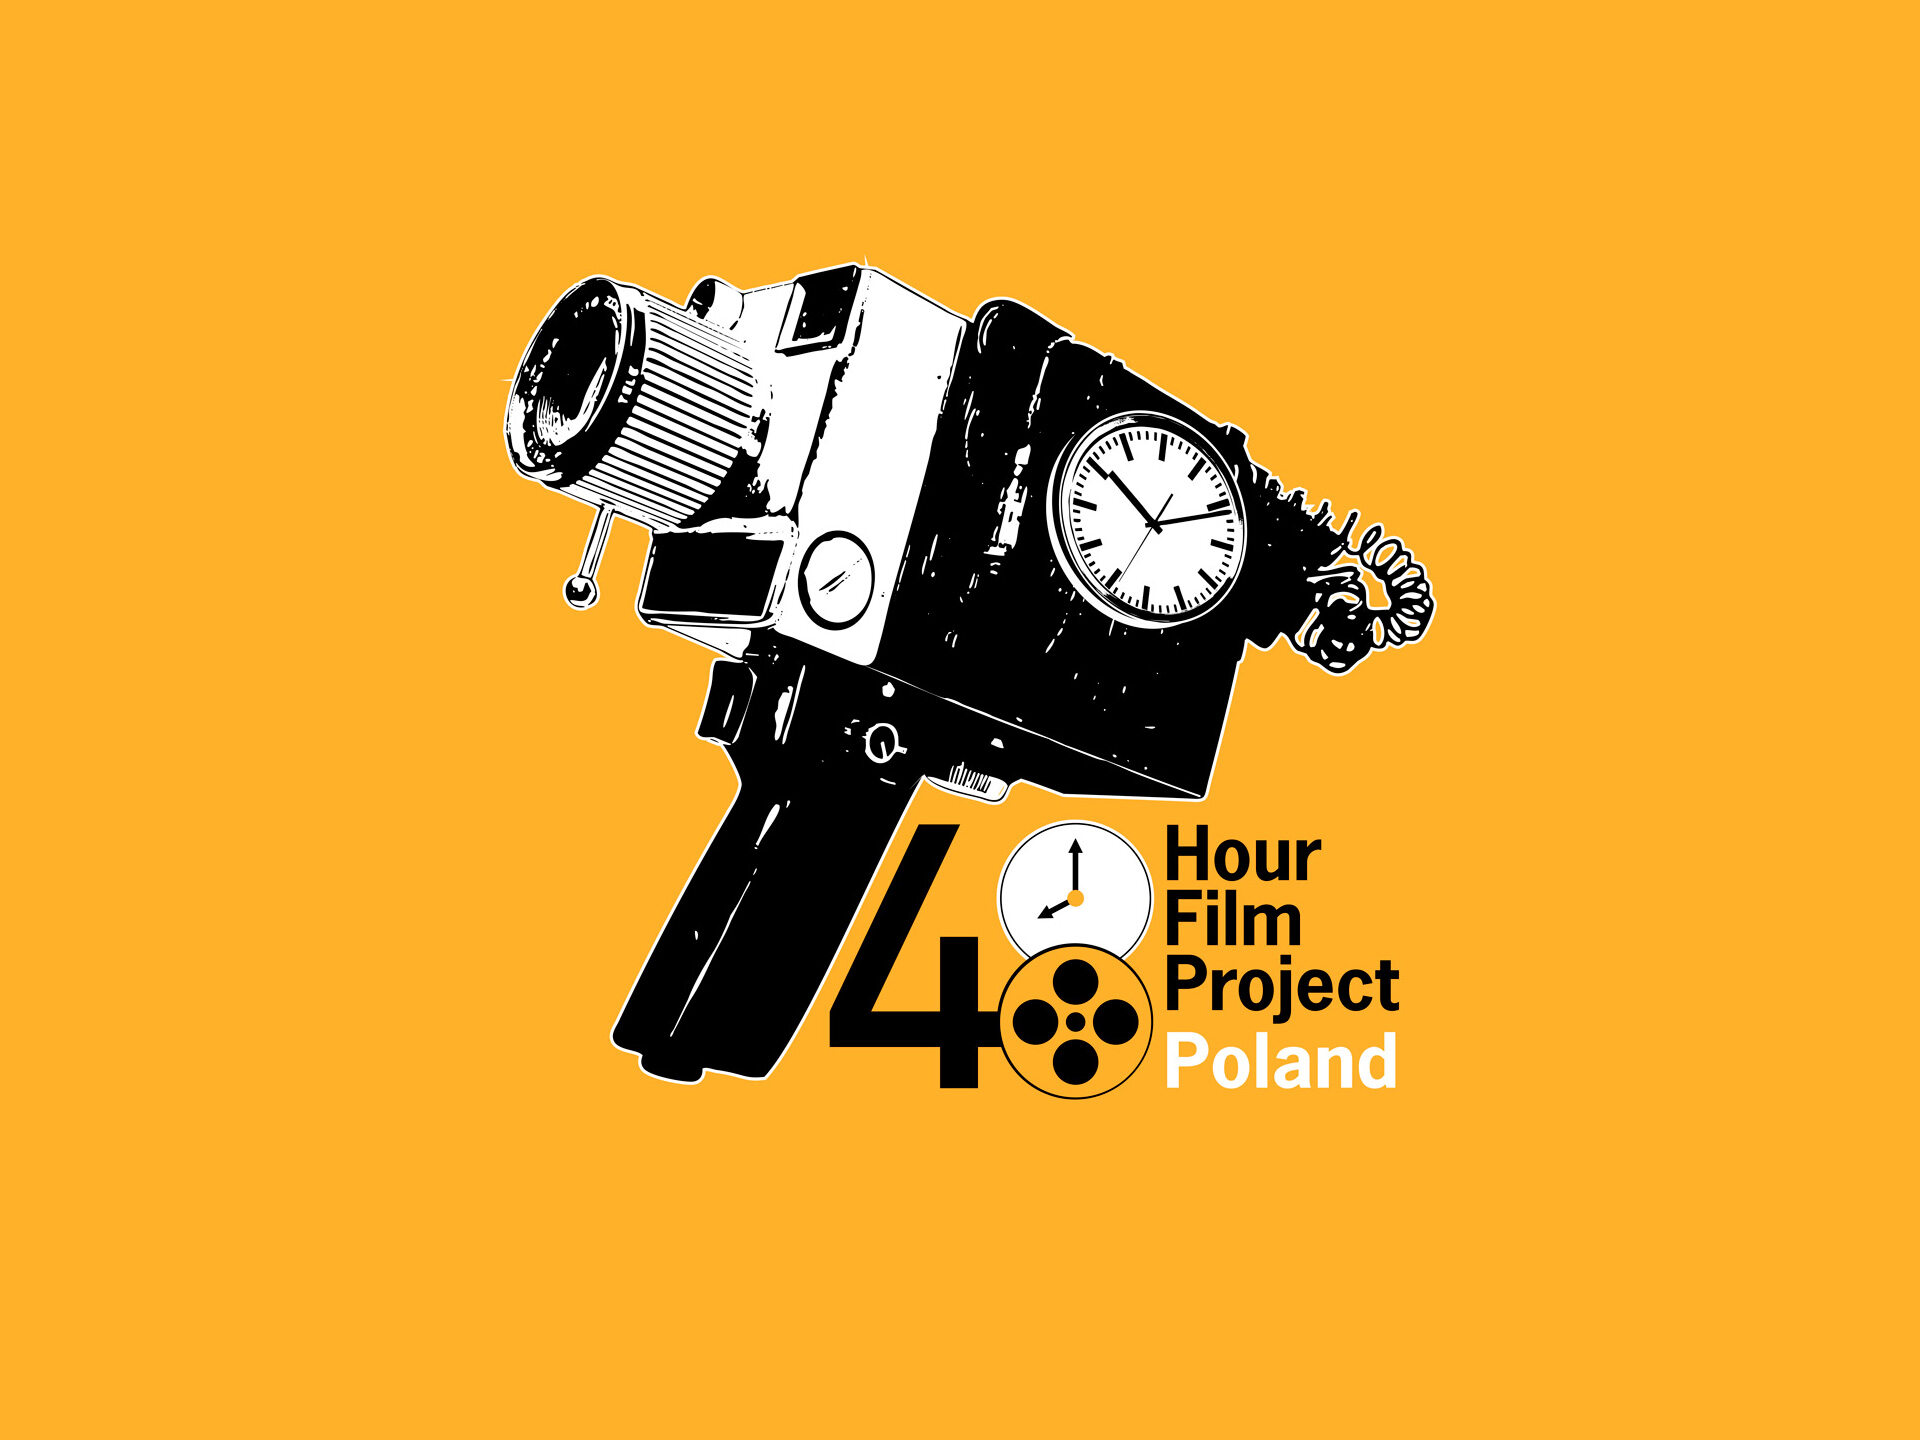 48 Hour Film Project Poland